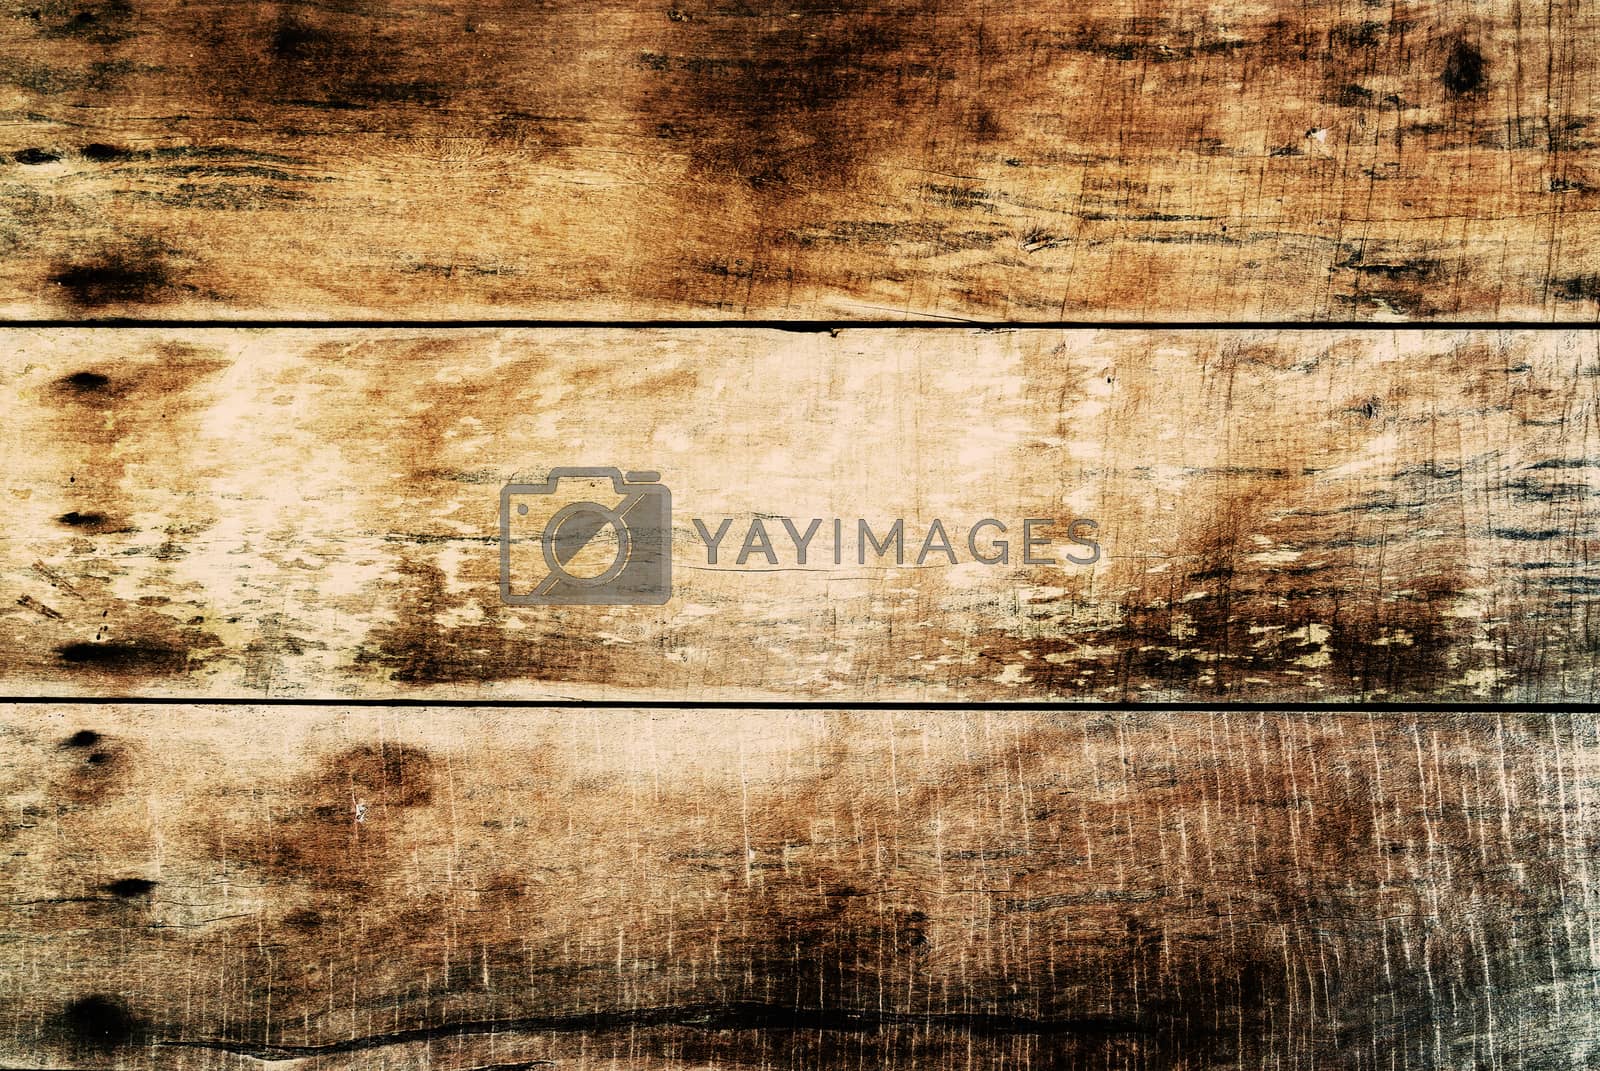 Royalty free image of wood planks texture background woody by Vladyslav